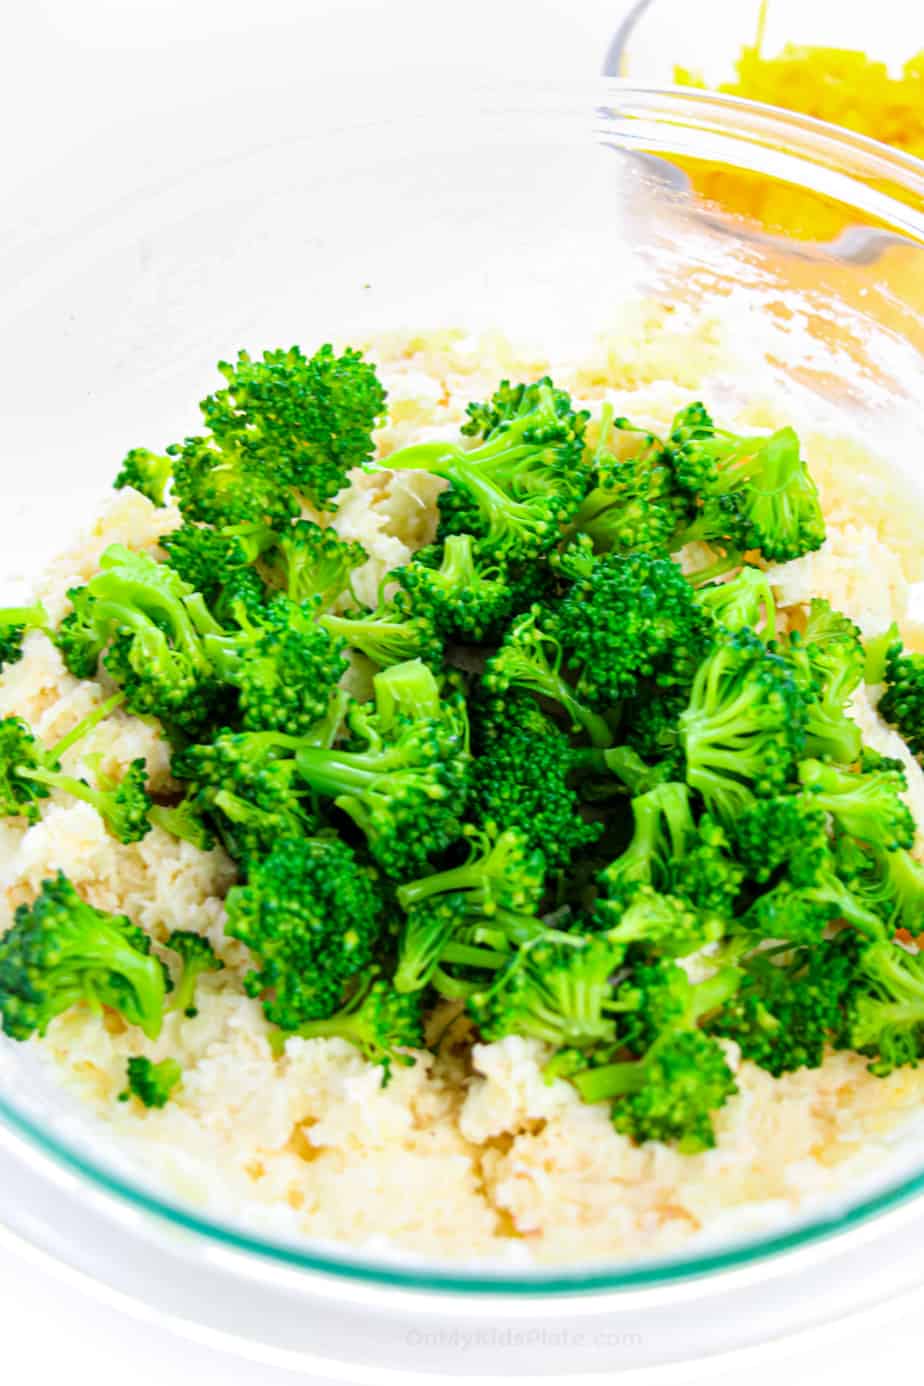 Broccoli being added to a mashed potato mixture in a bowl.